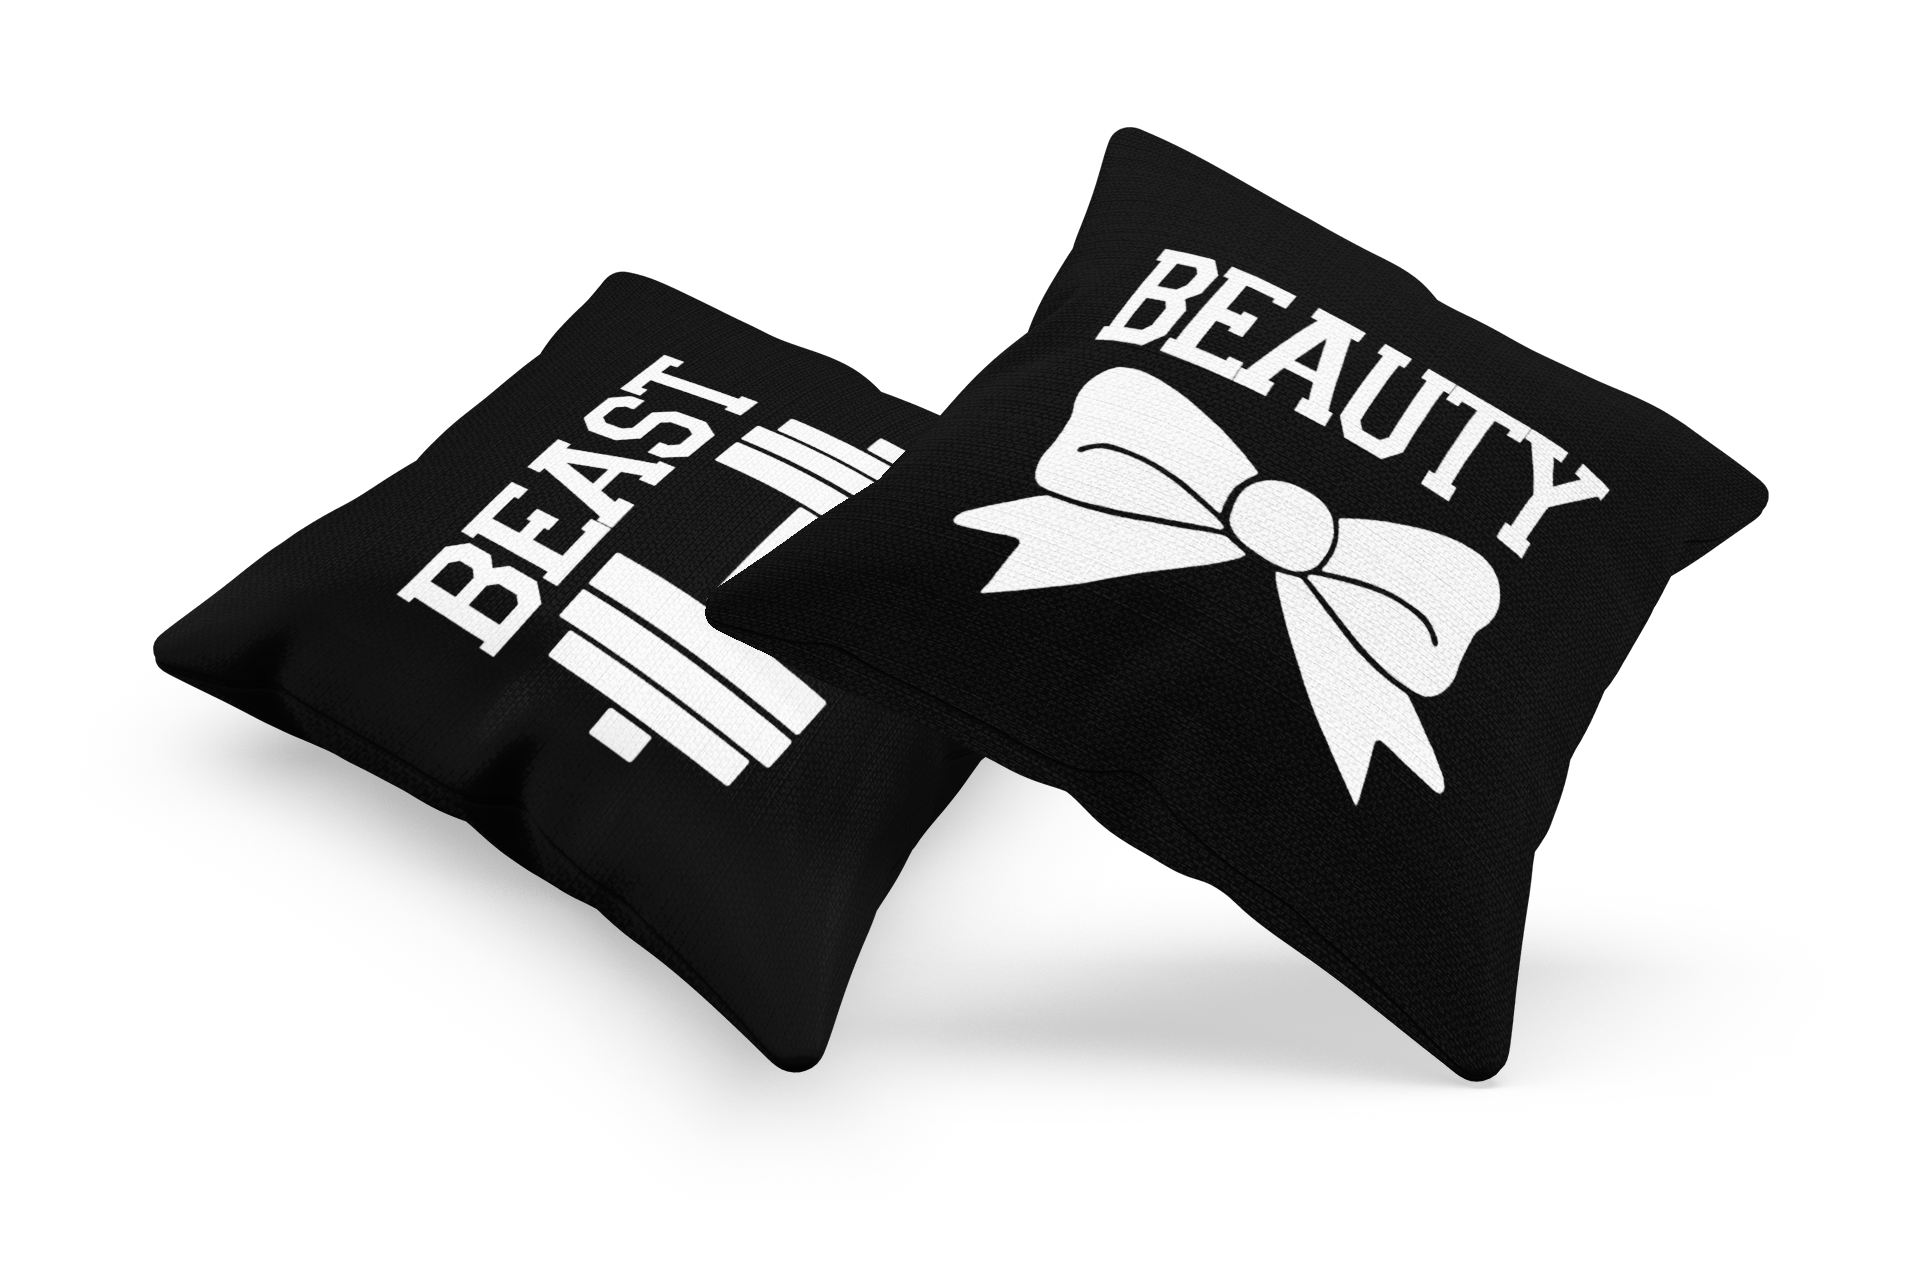 Cute Beast and Beauty 2 Couple Cushion Case / Pillow Cases